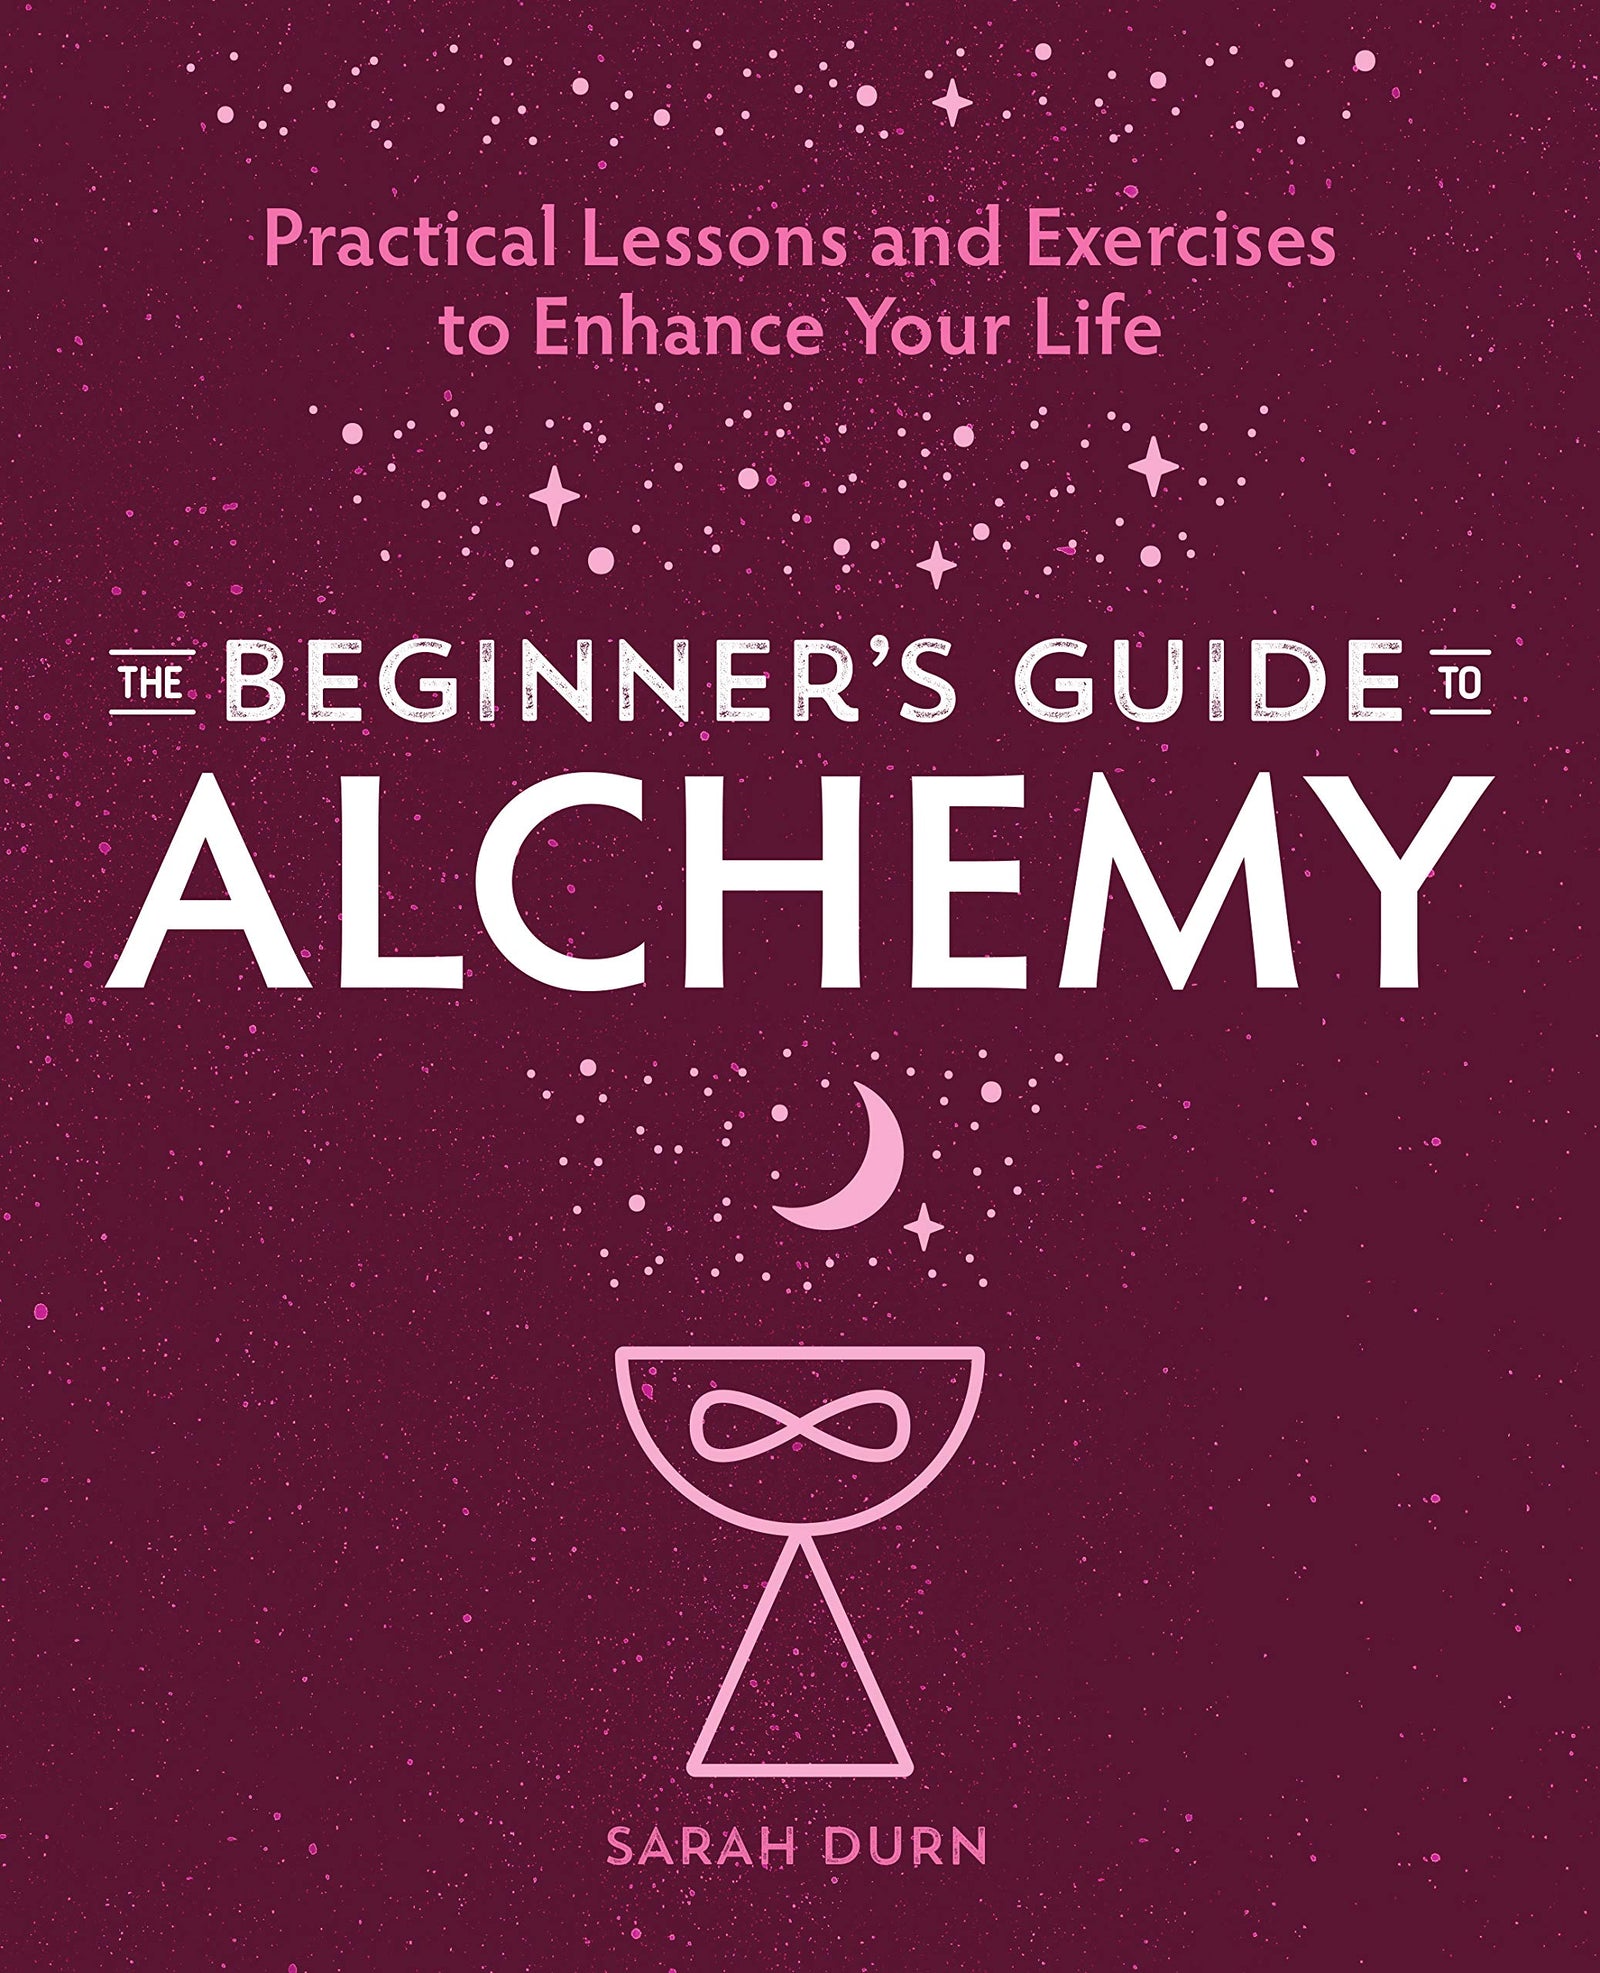 The Beginner's Guide to Alchemy